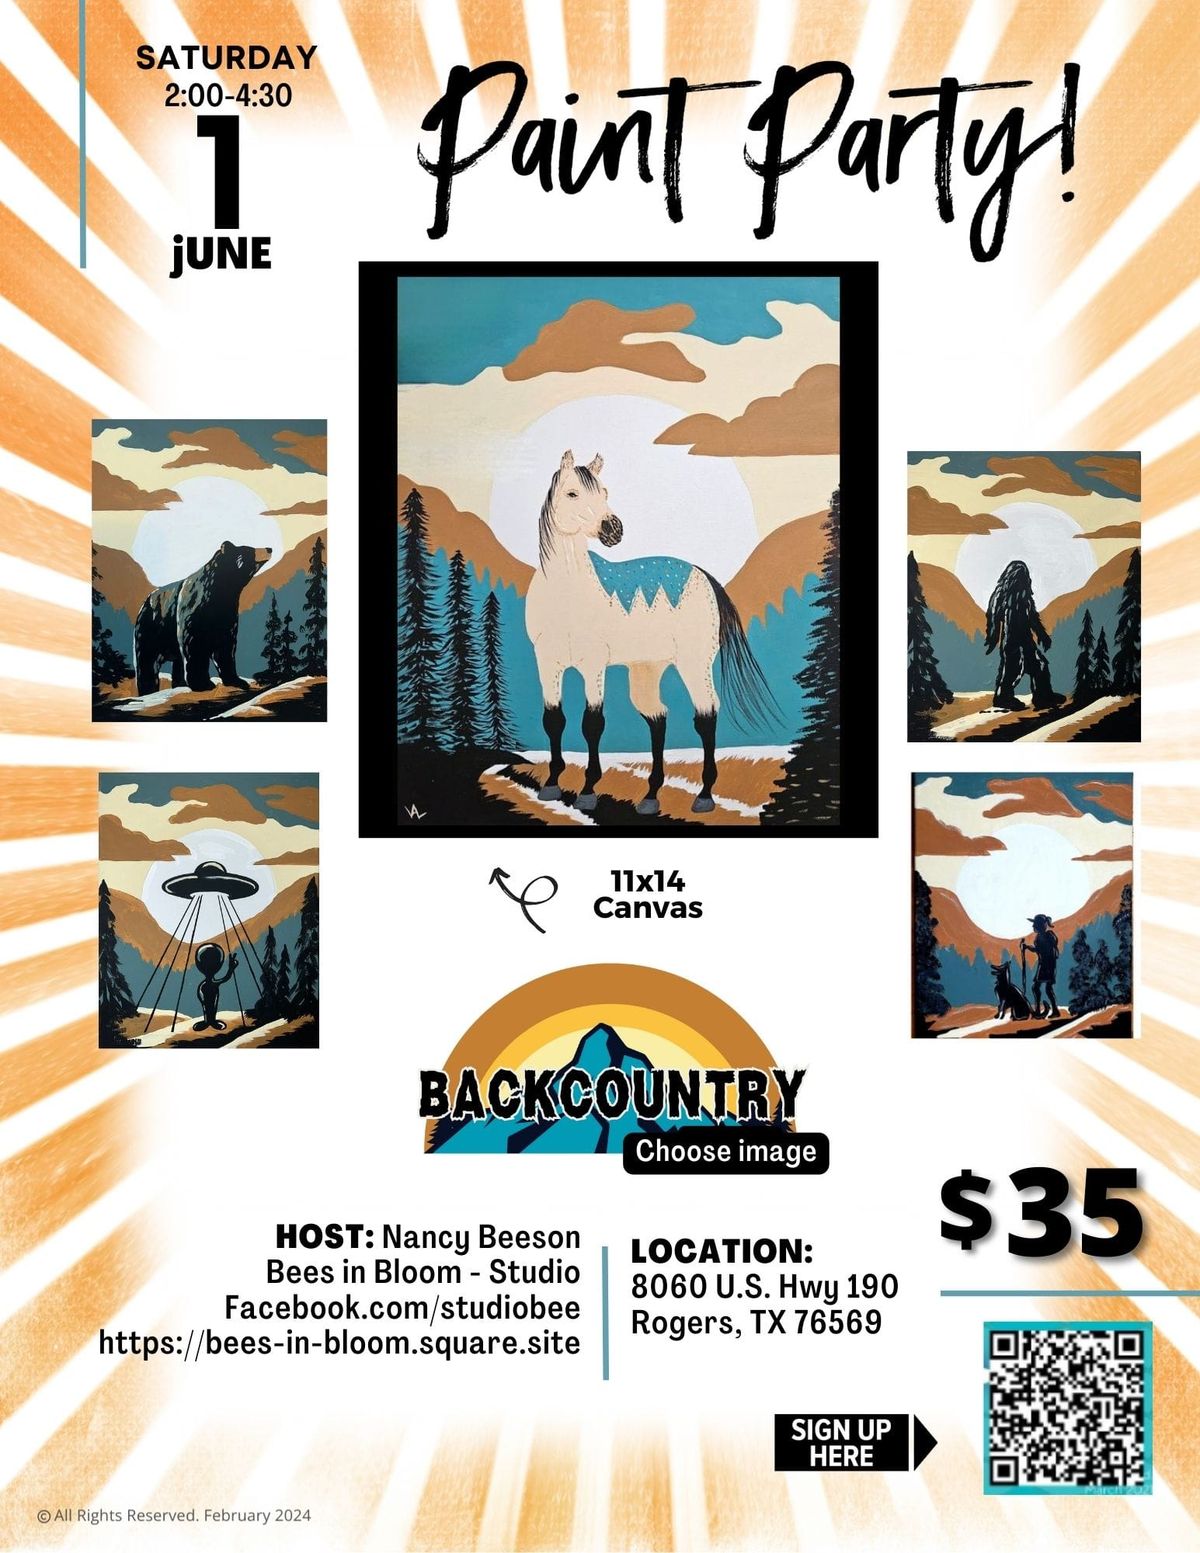 Dancing Bee Winery - Backcountry Paint Party